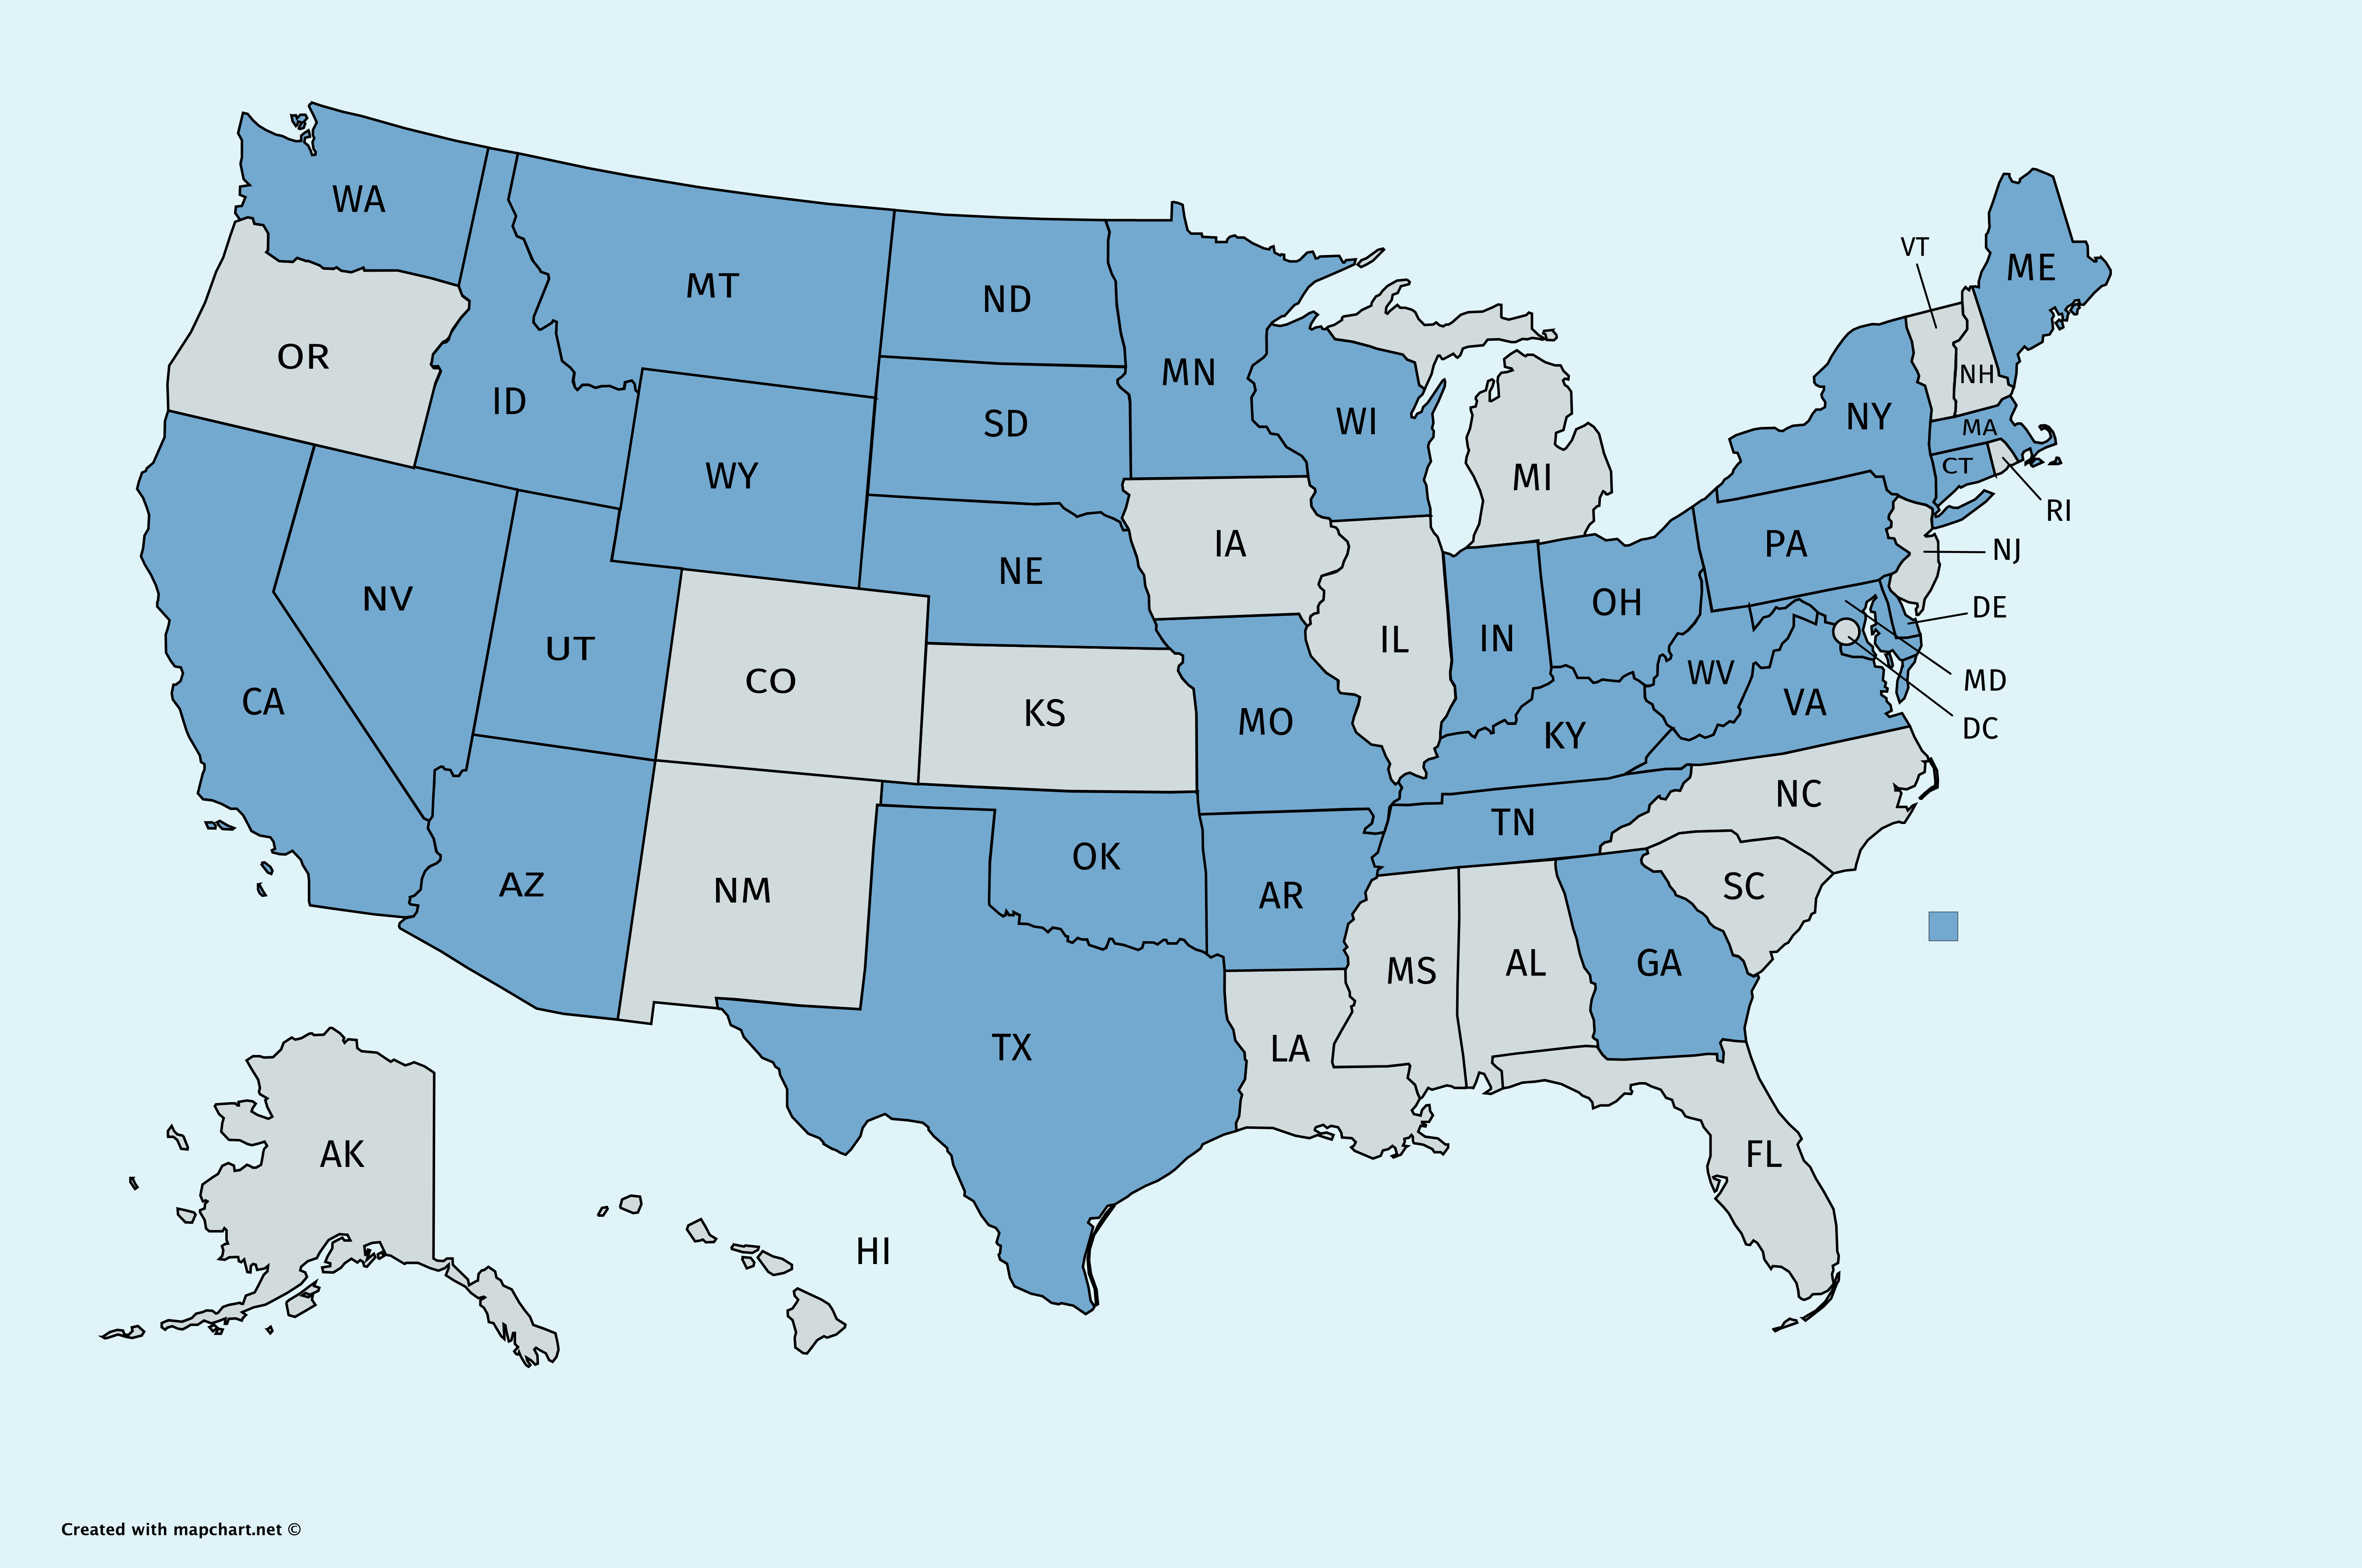 map of US states corresponding to figure 1 in the preprint